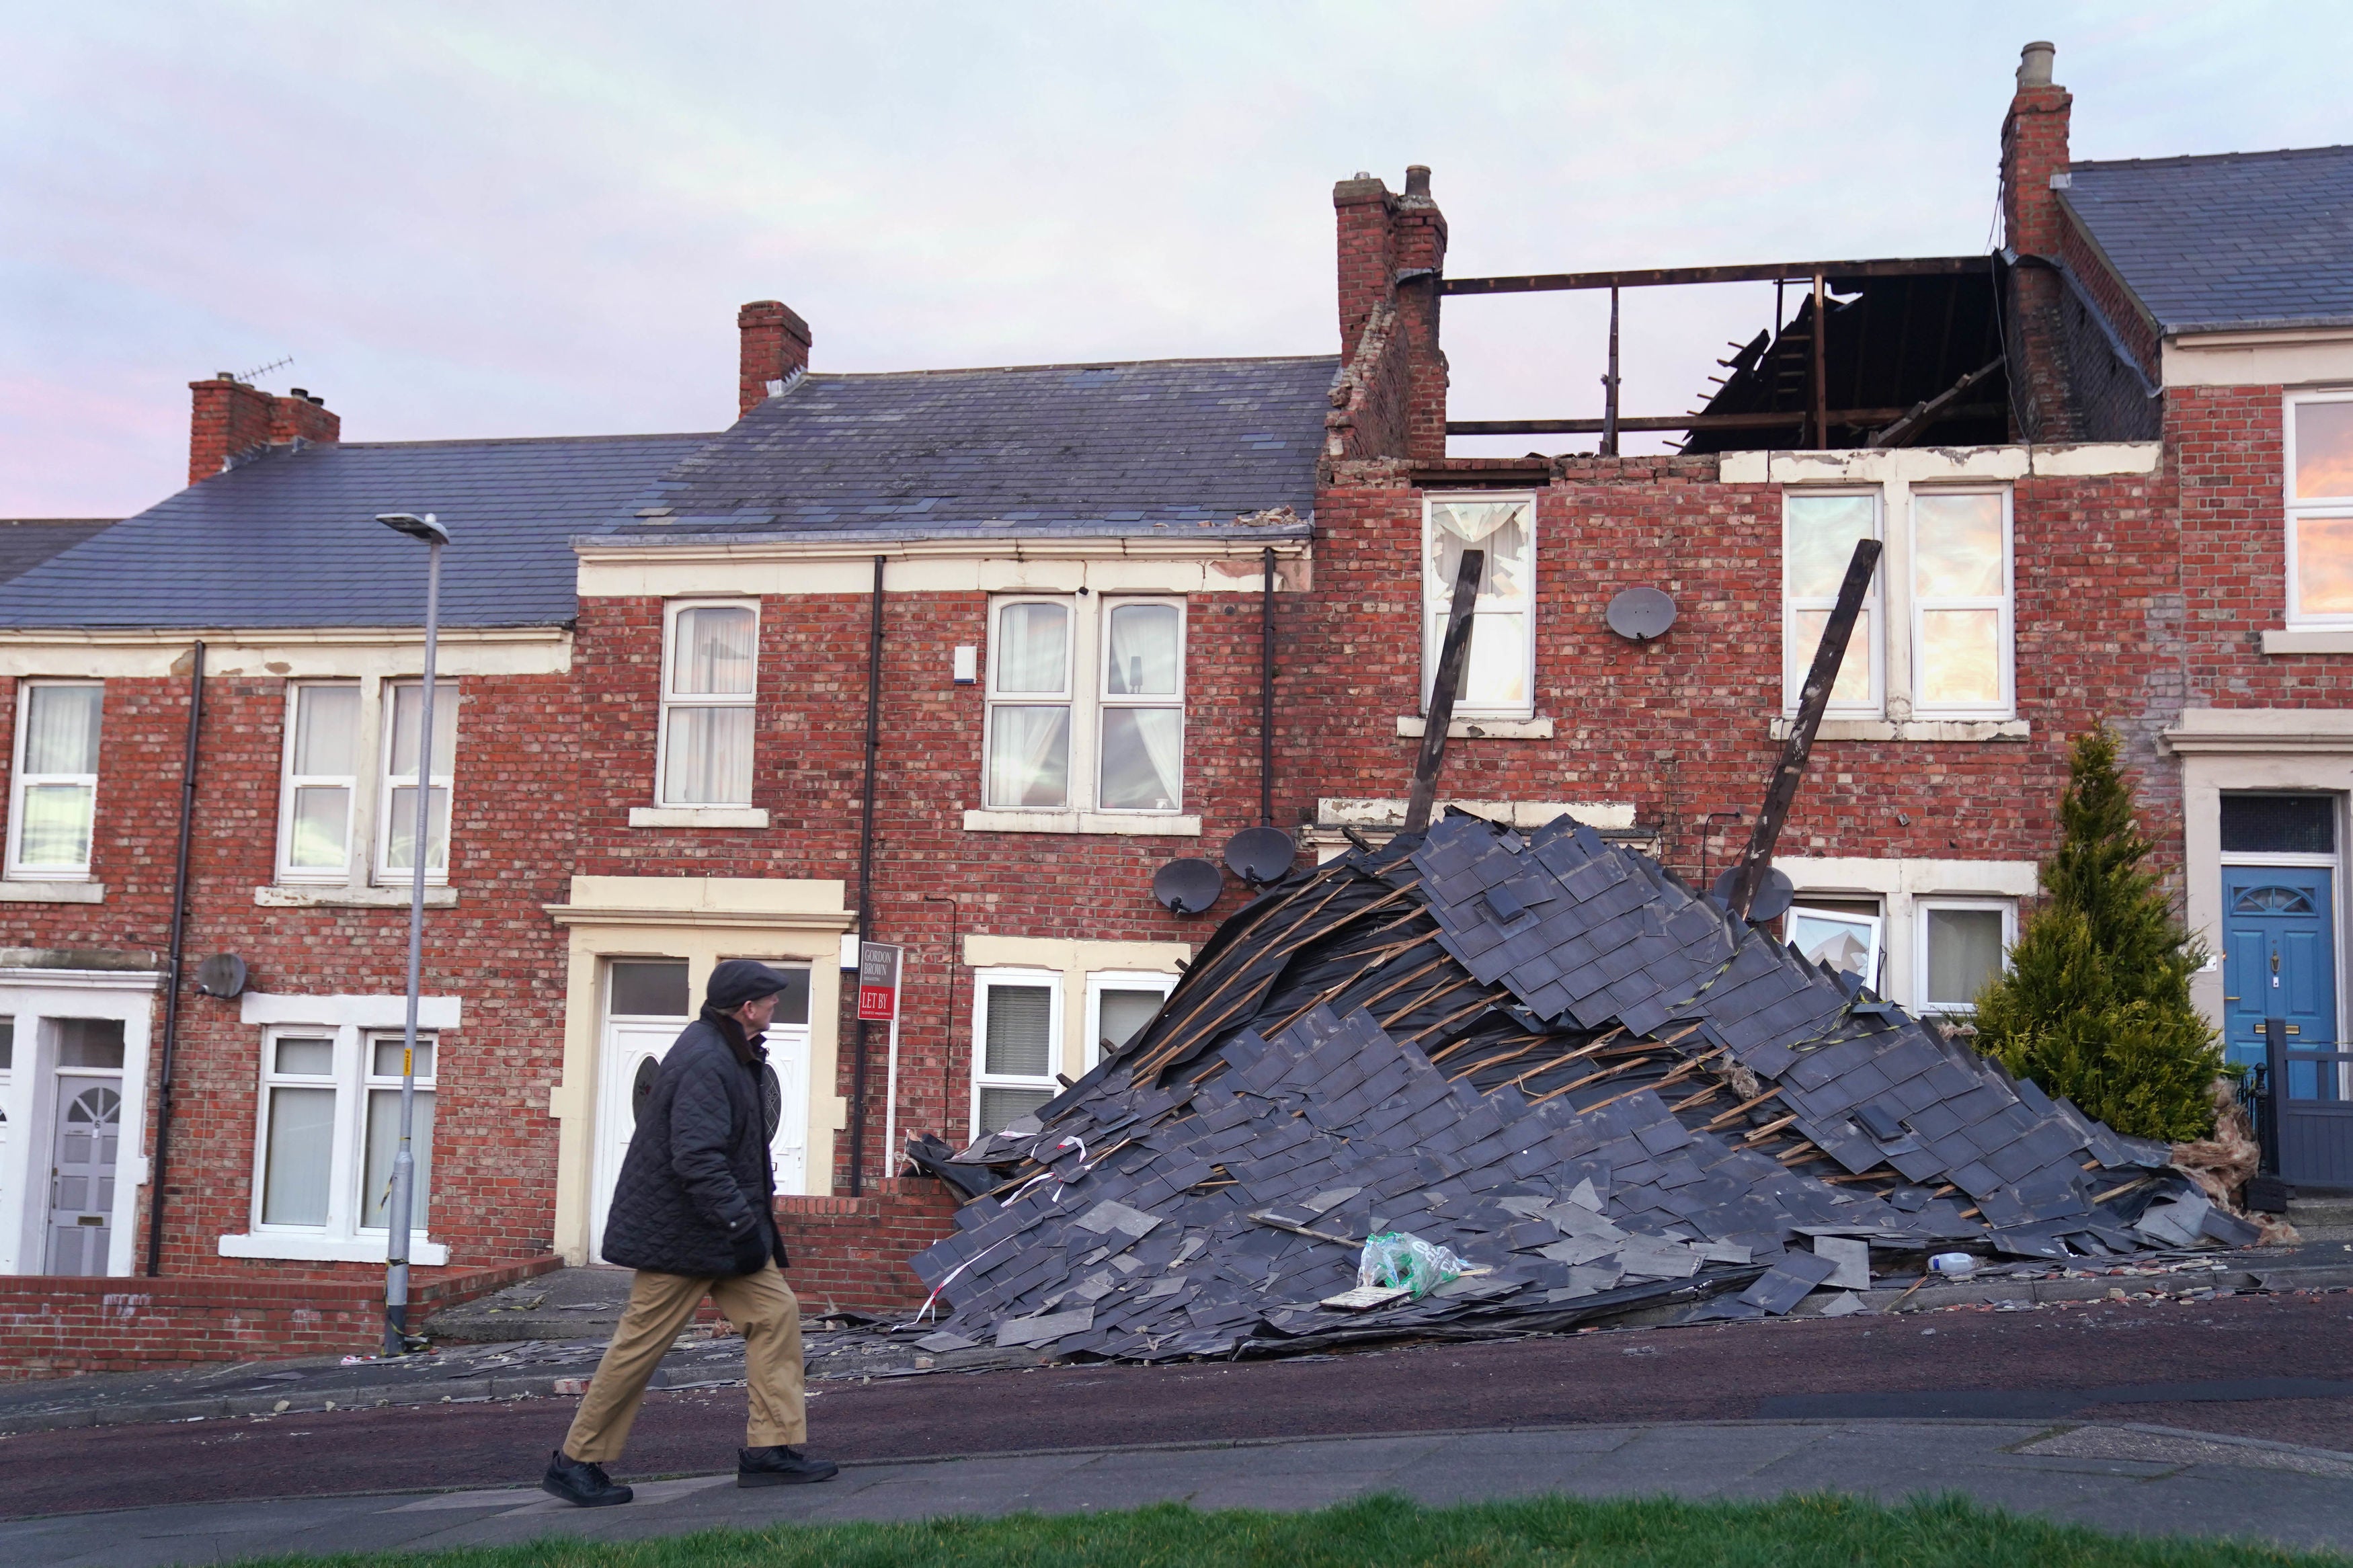 A house on Overhill terrace in Bensham, Gateshead which lost its roof after strong winds from Storm Malik